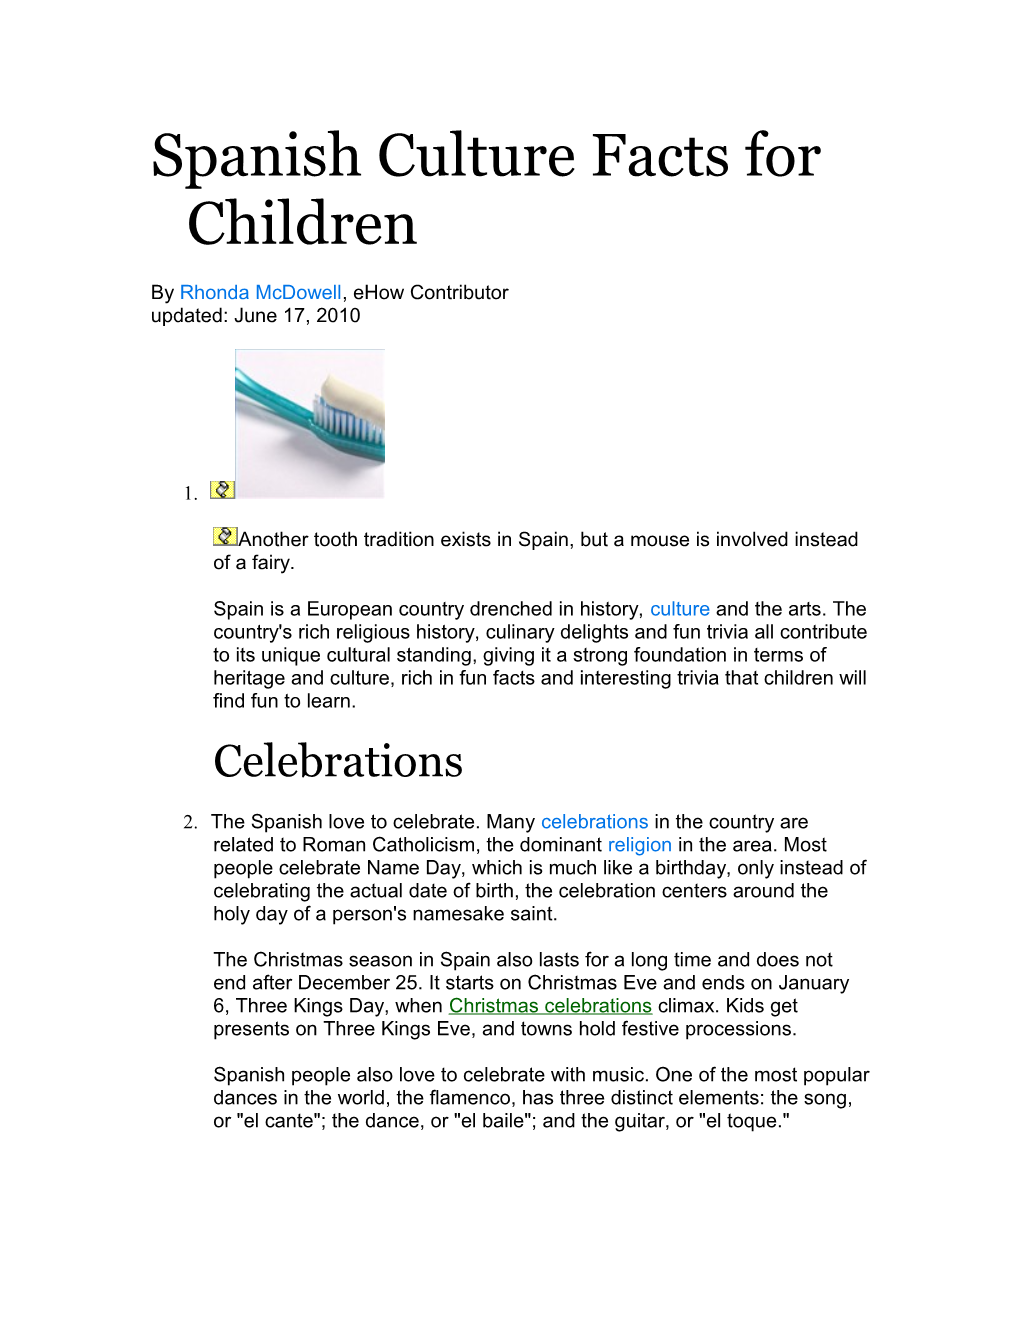 Spanish Culture Facts for Children